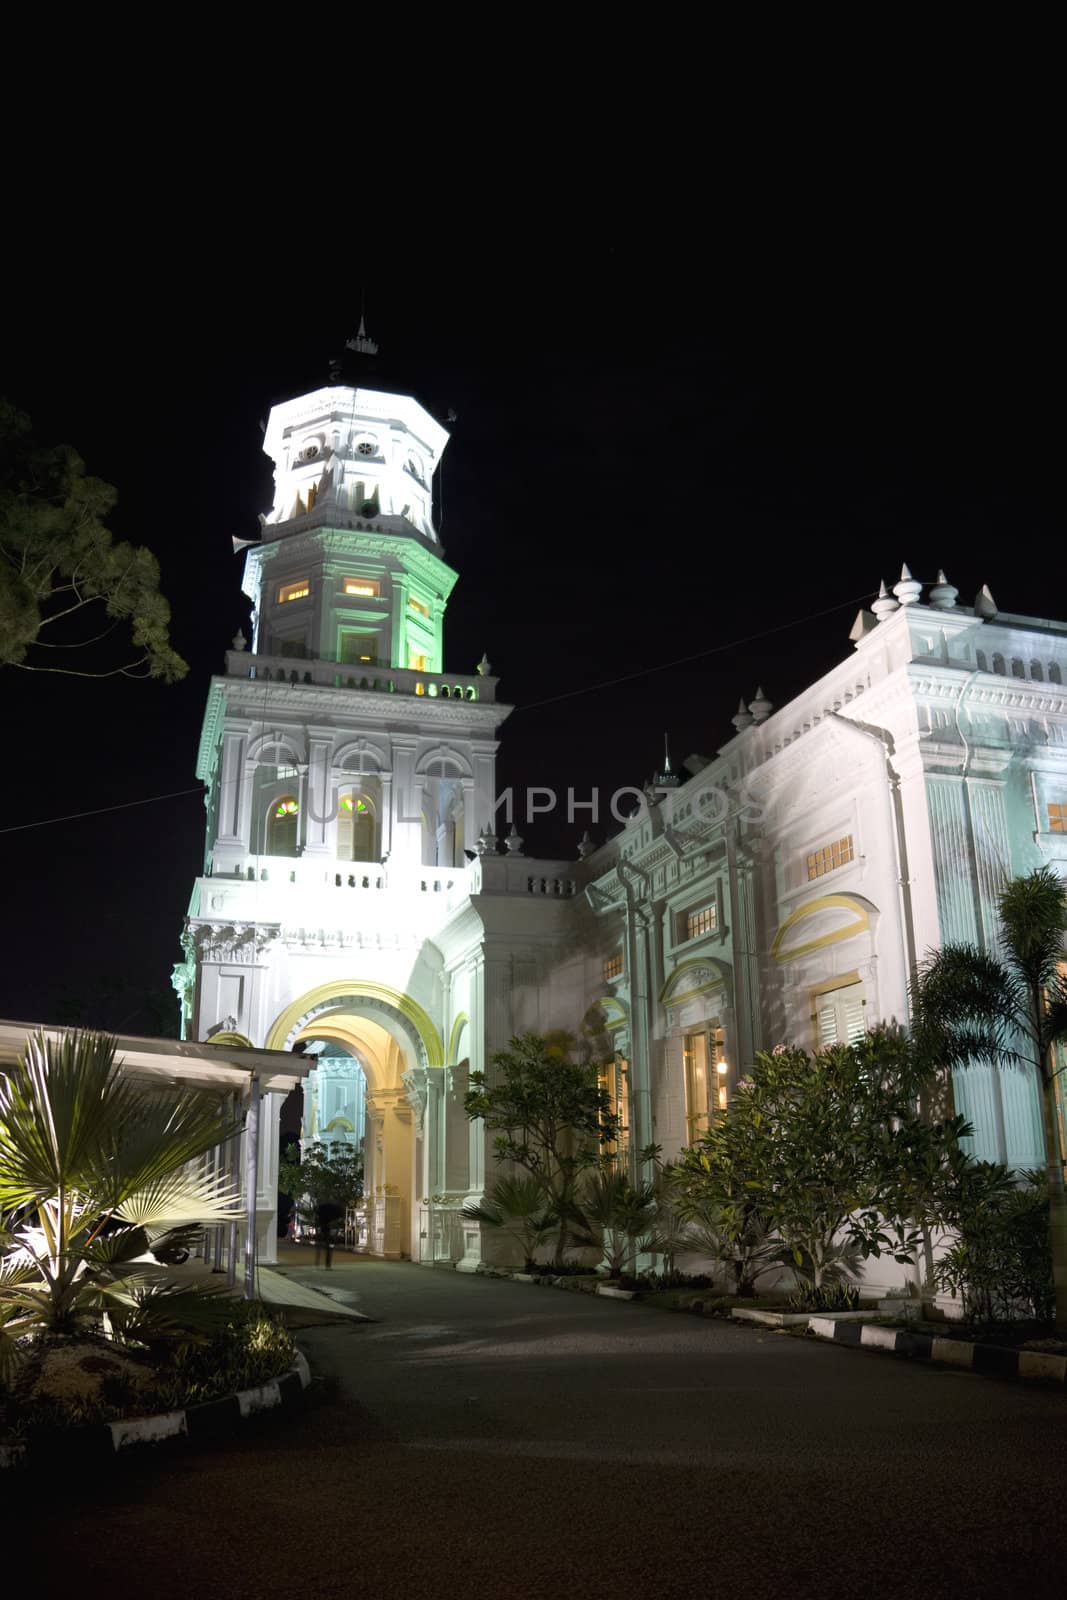 Sultan Abu Bakar Mosque at night. The mosque is located at Johore Bahru, Malaysia and was completed in 1900. The architectural style is mainly Victorian.